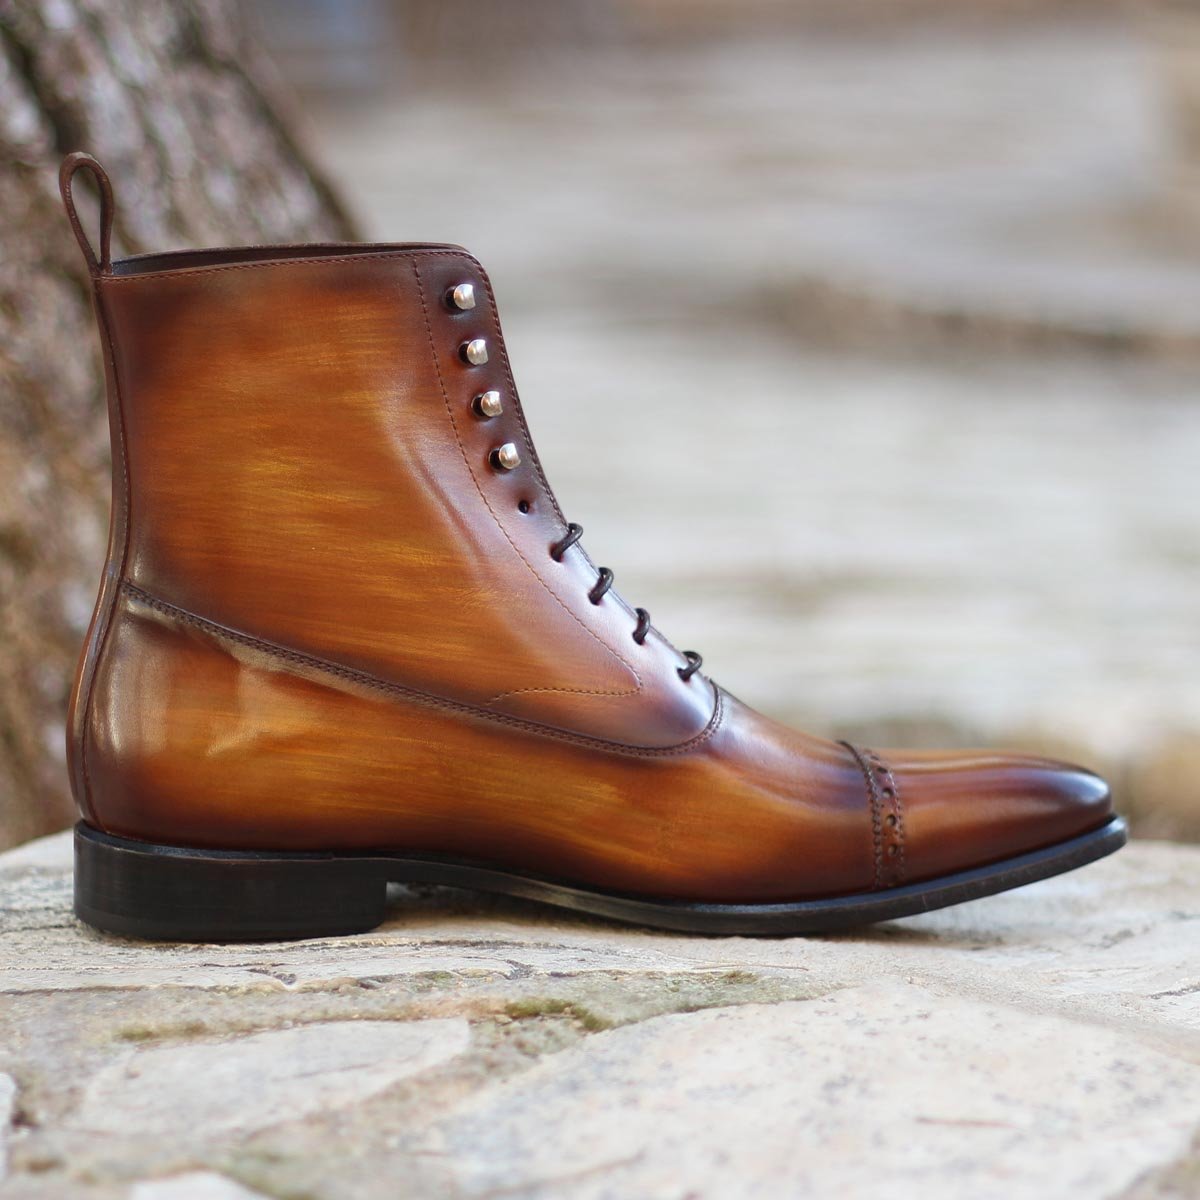 New Age Unique Handcrafted Patina Dress Boots